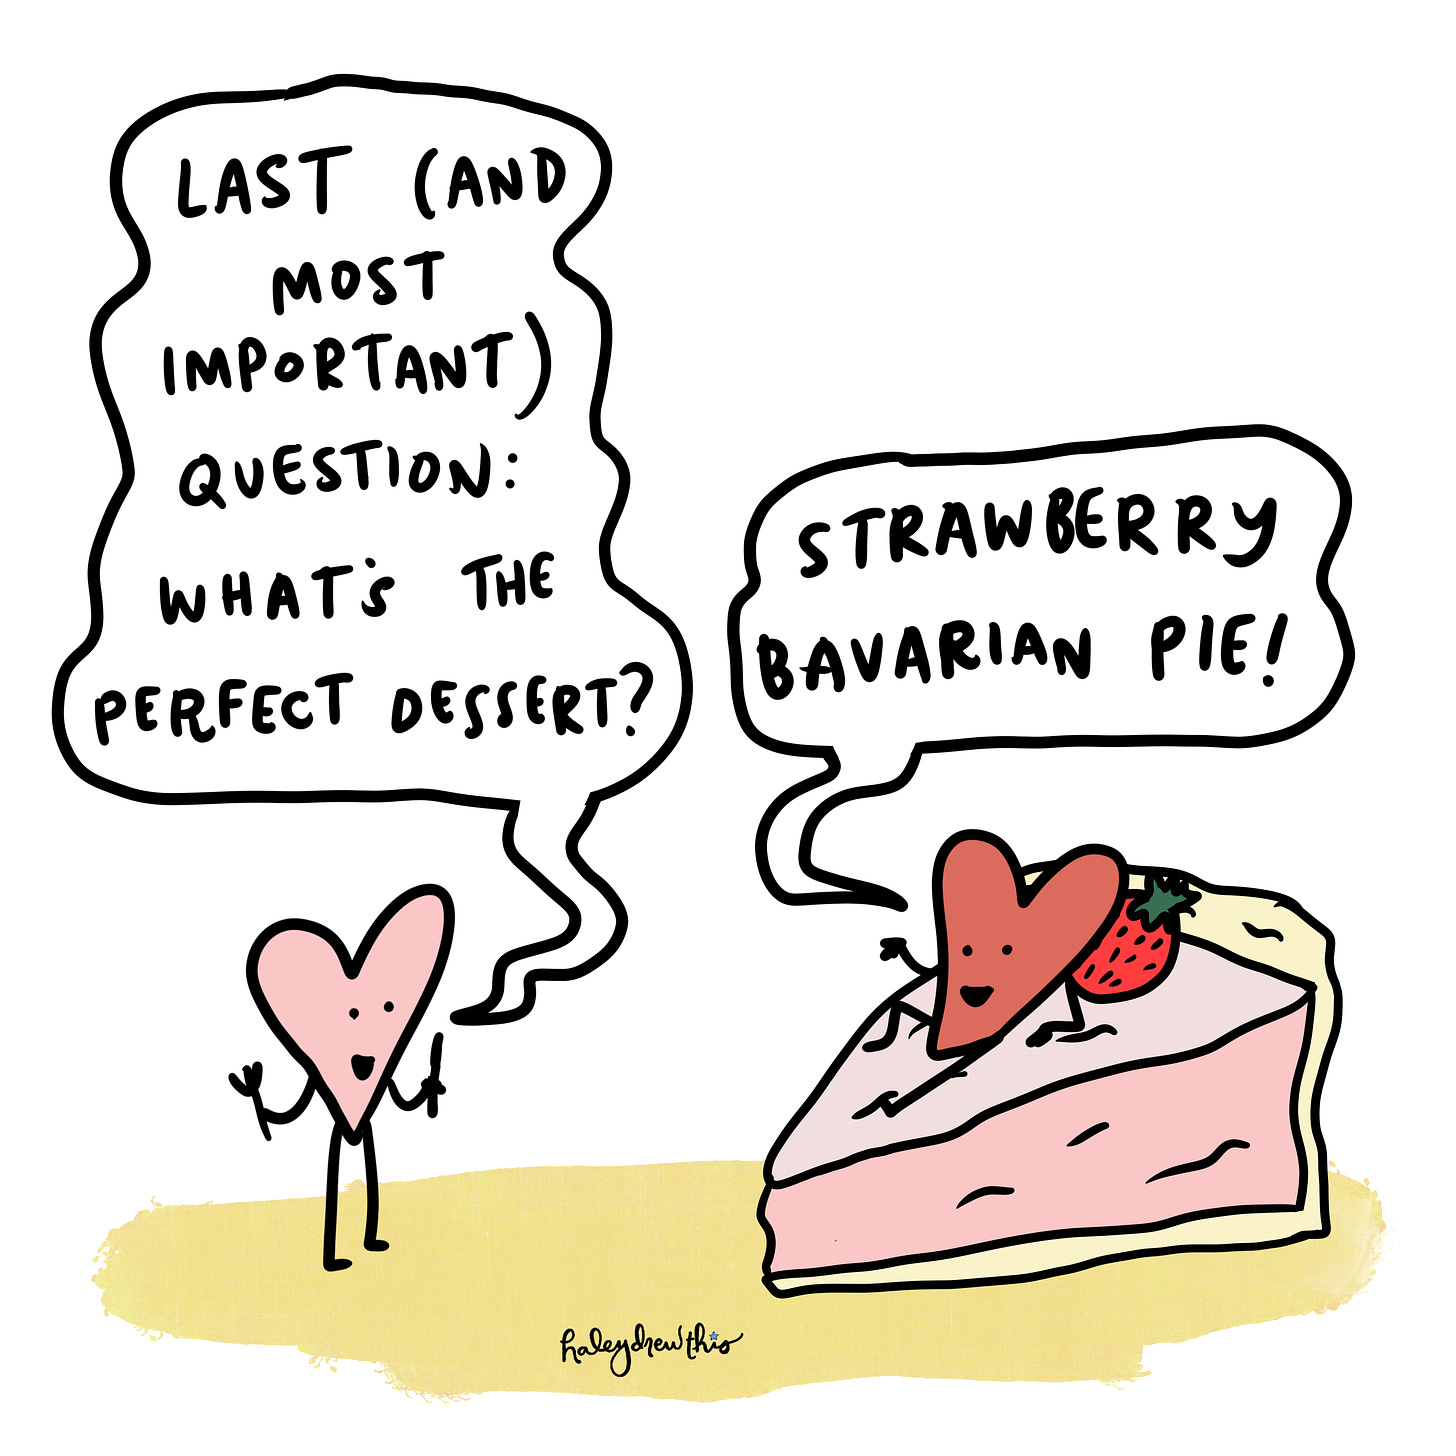 Is there a perfect dessert? What is it? Strawberry Bavarian Pie